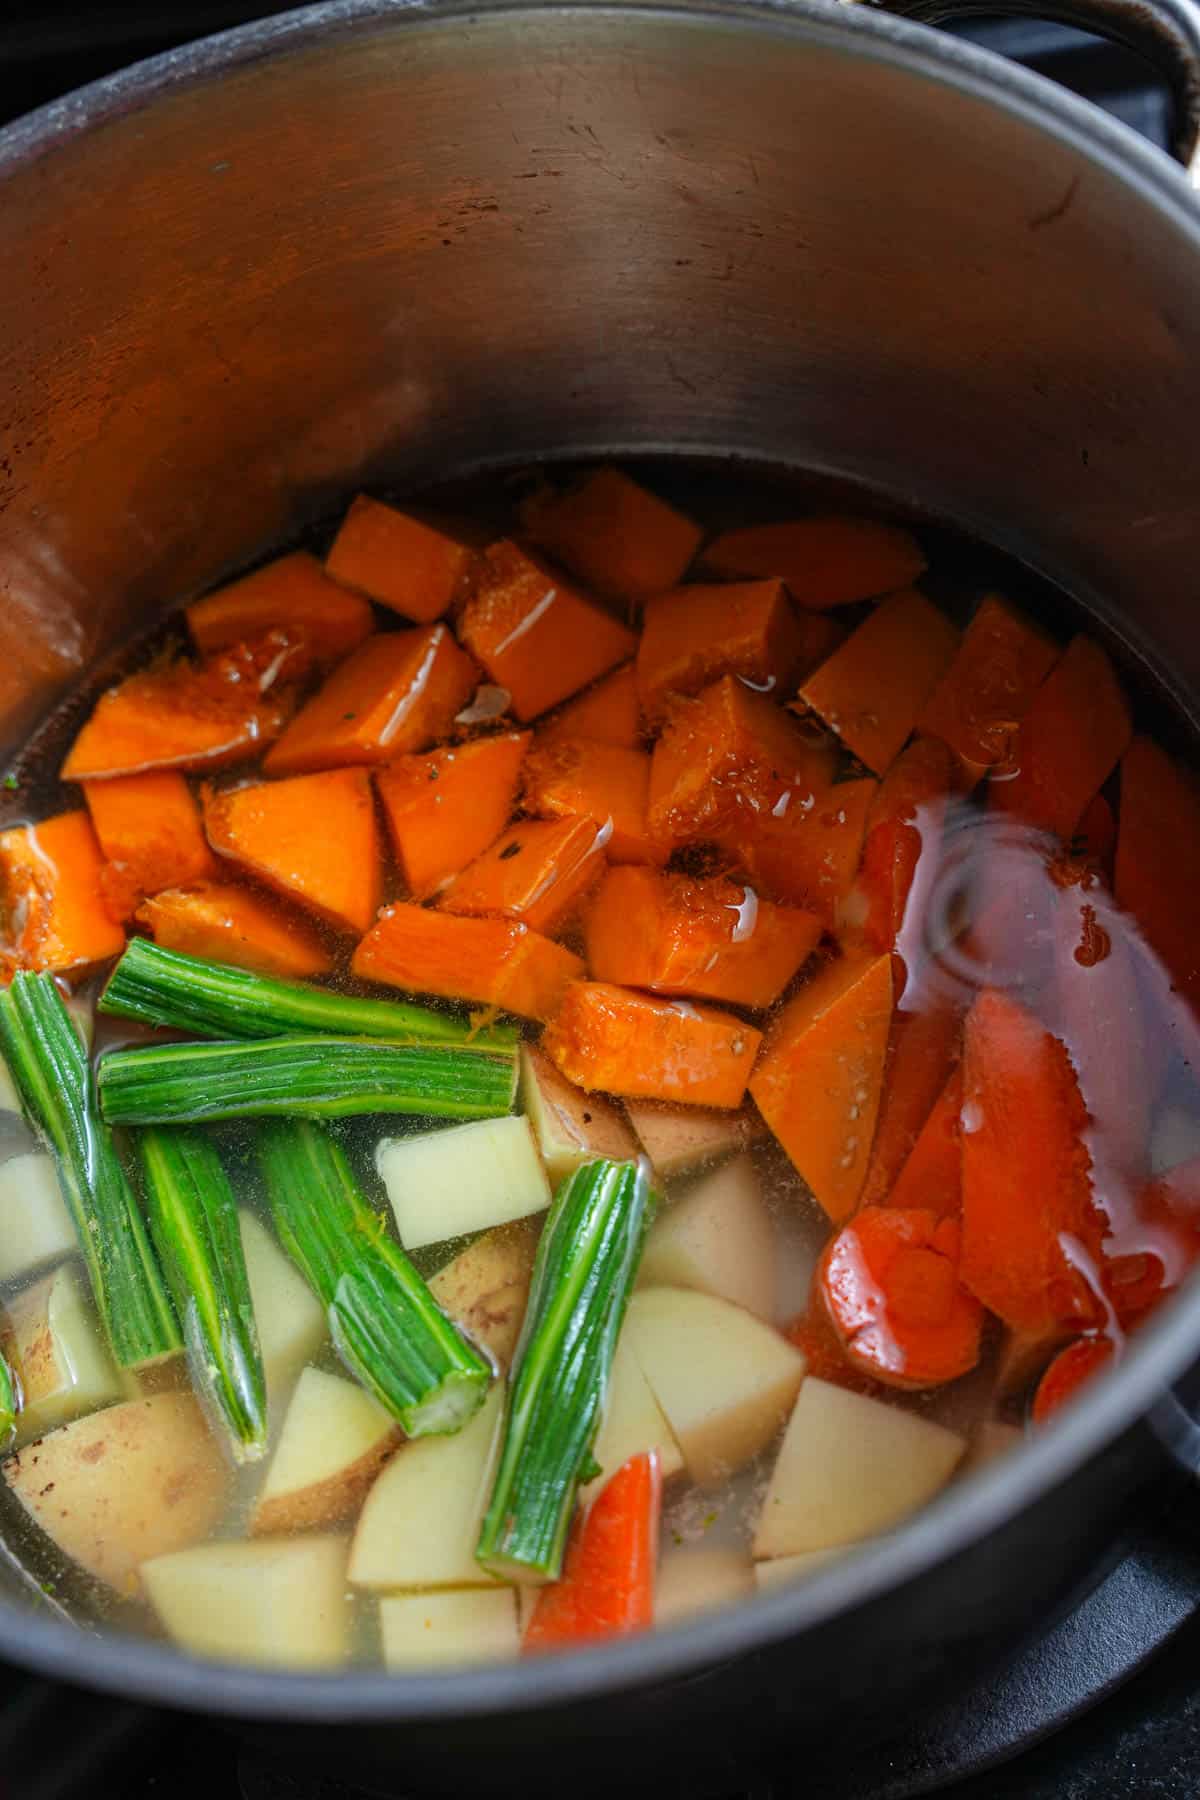 Pumpkin, moringa, potatoes, and carrot are brought up to a boil in a pot with water on the stove.